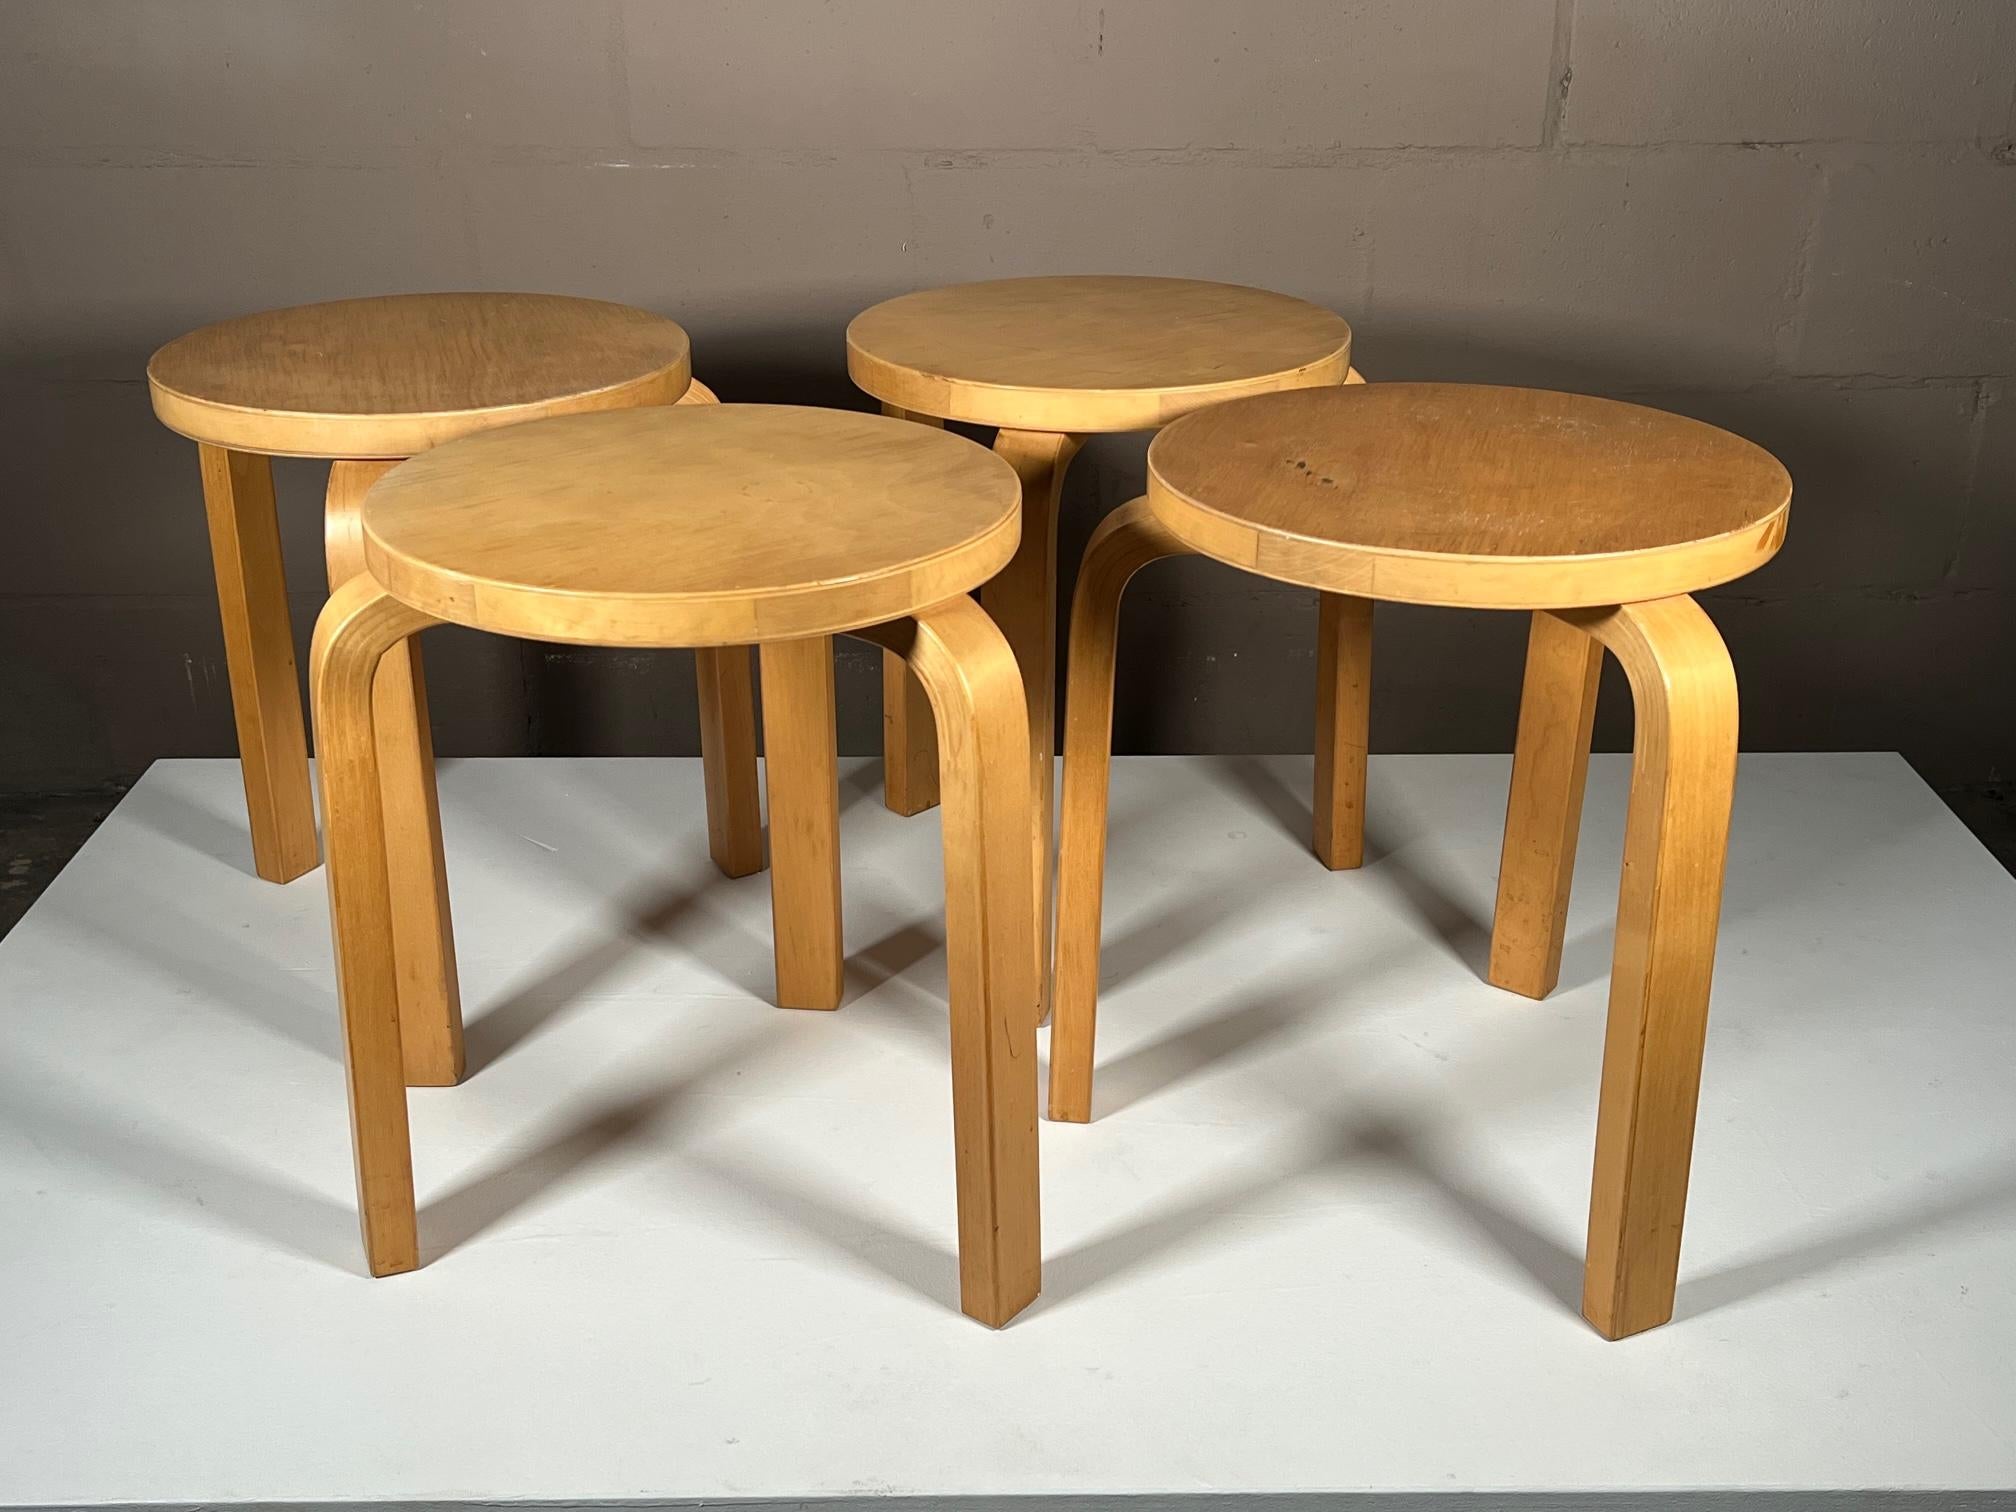 A great set of four (4) stools by Alvar Aalto made in Finland and distributed by ICF, NYC. The stacking stools have a wonderful patina and original finish.